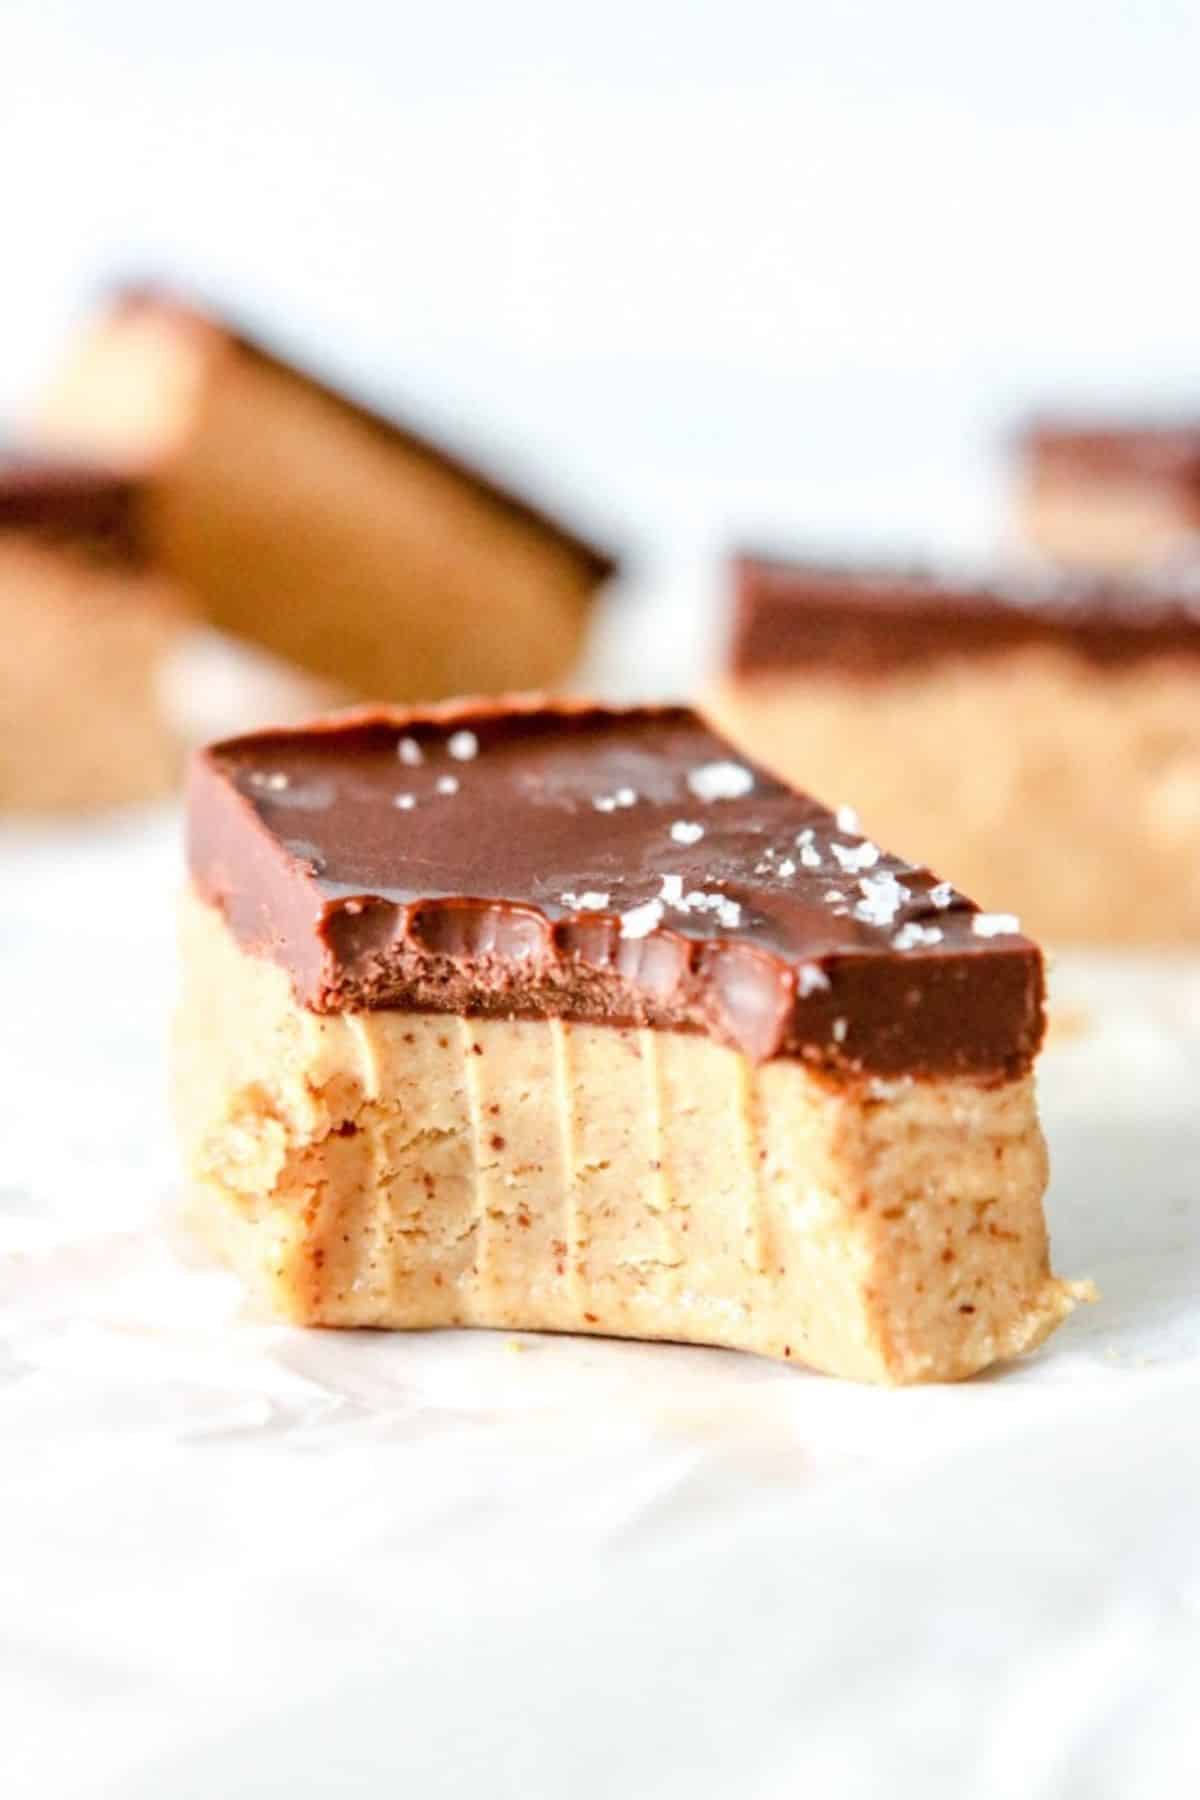 Delicious Chocolate Almond Butter Bar.